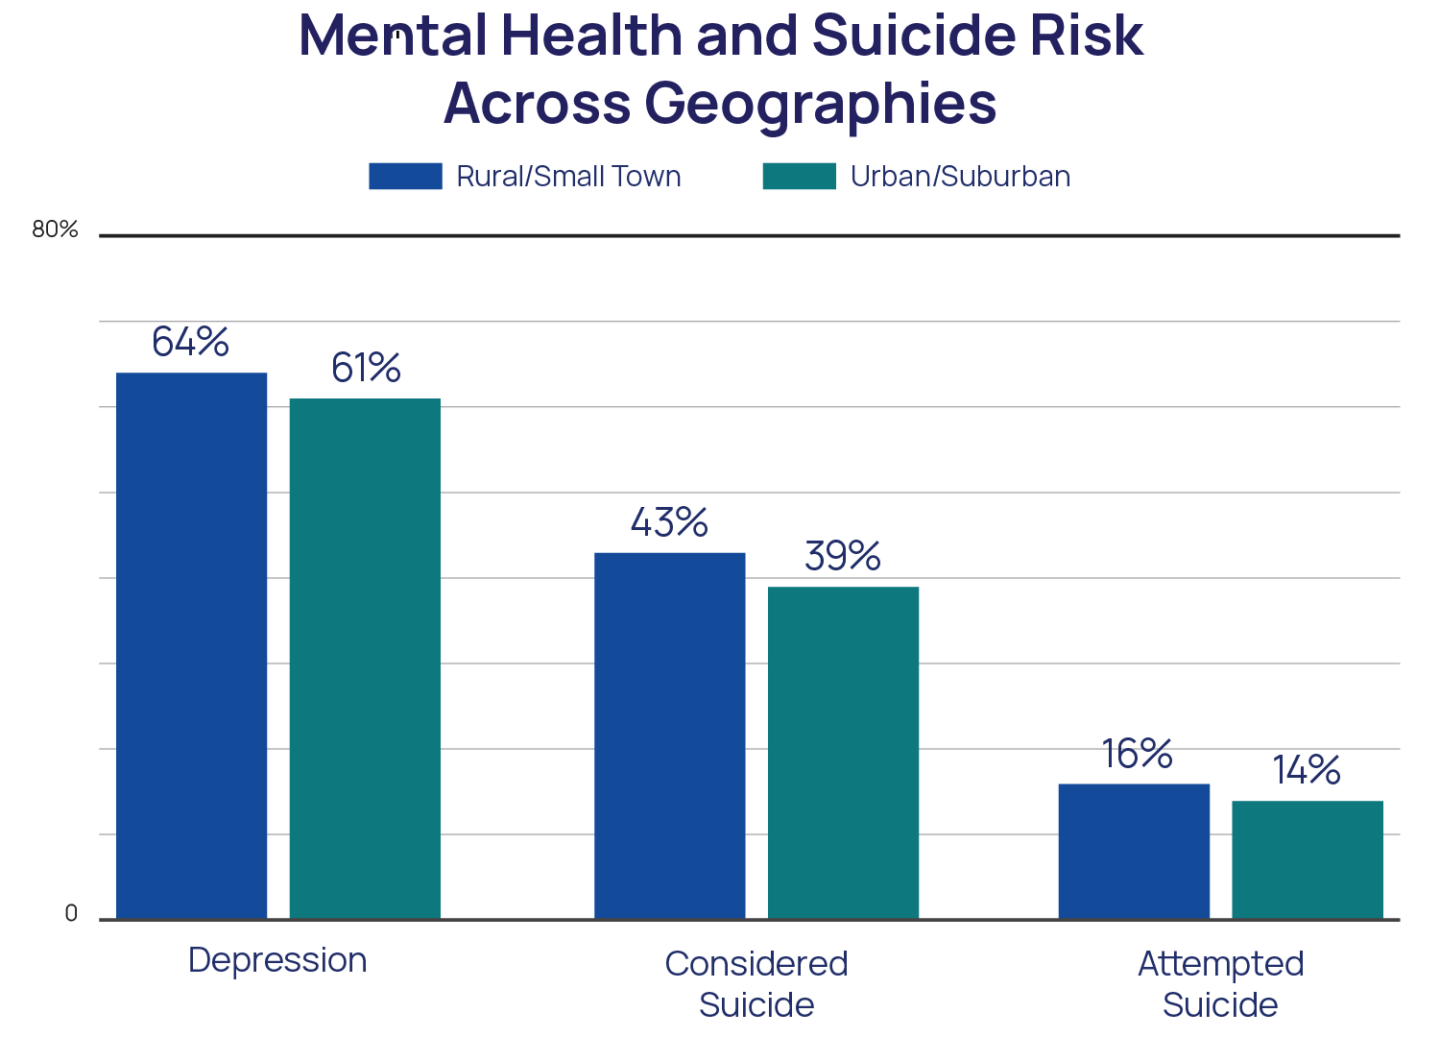 Mental Health and Suicide Risk Across Geographies bar chart